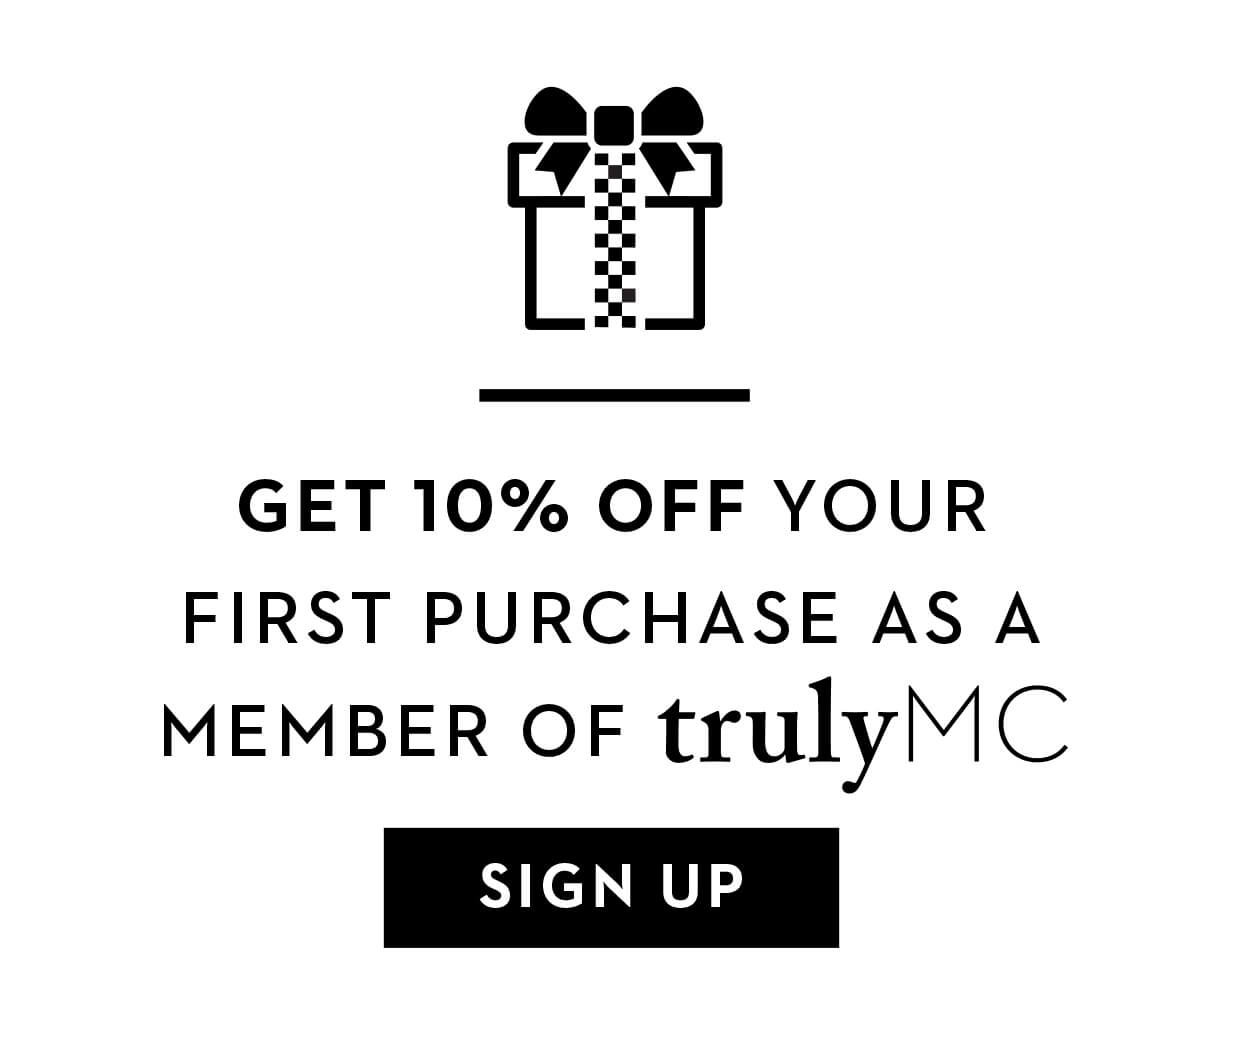 GET 10% OFF YOUR FIRST PURCHASE AS A MEMBER OF trulyMC